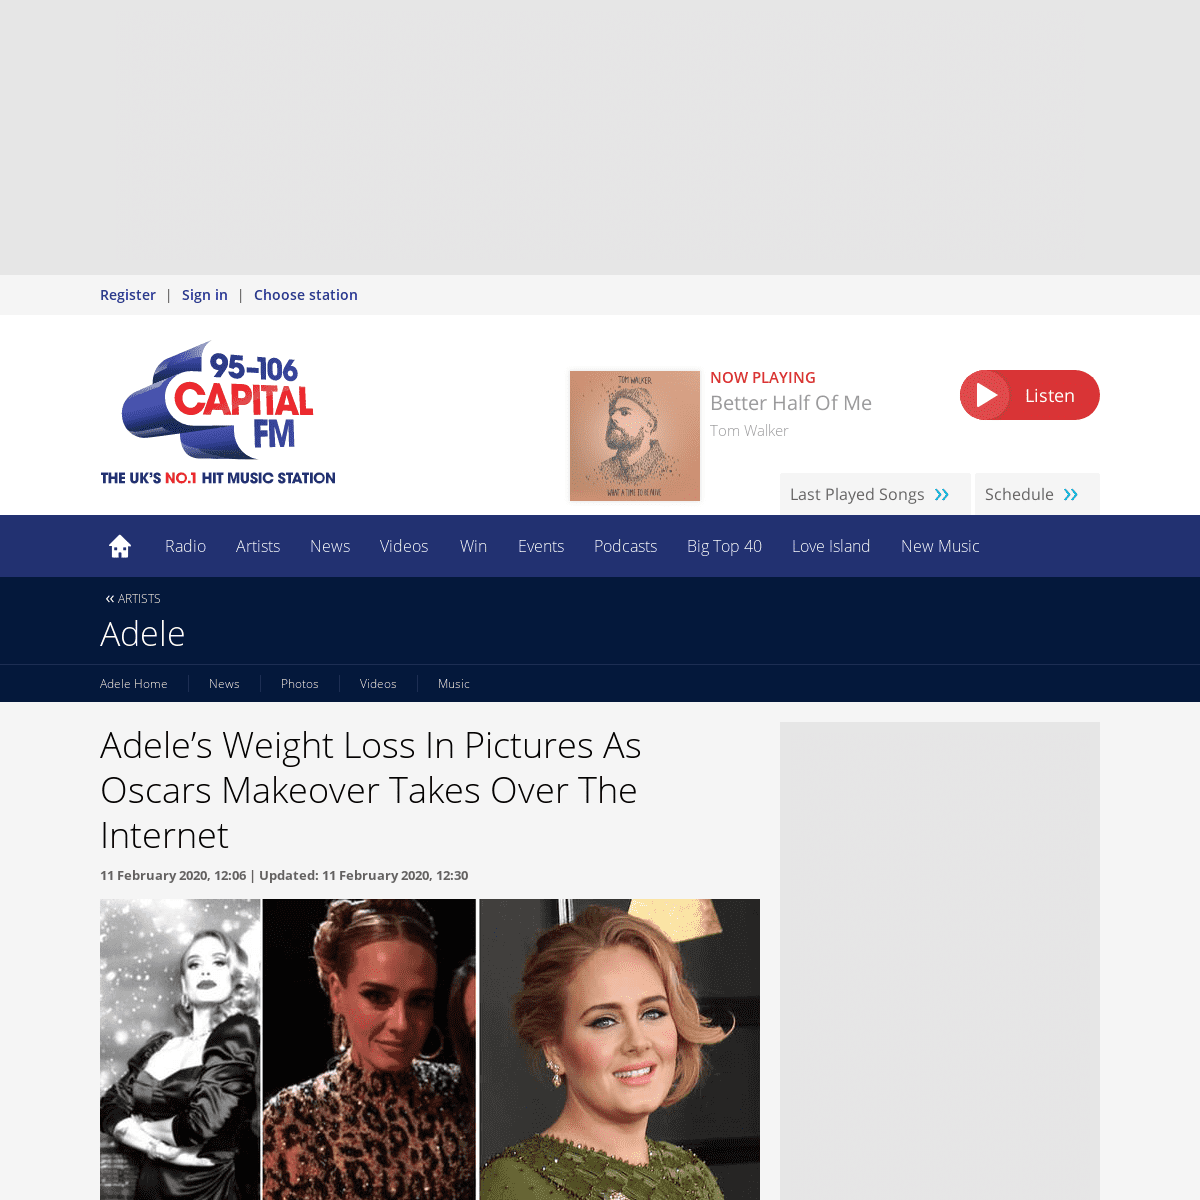 A complete backup of www.capitalfm.com/artists/adele/weight-loss-pictures-2020/